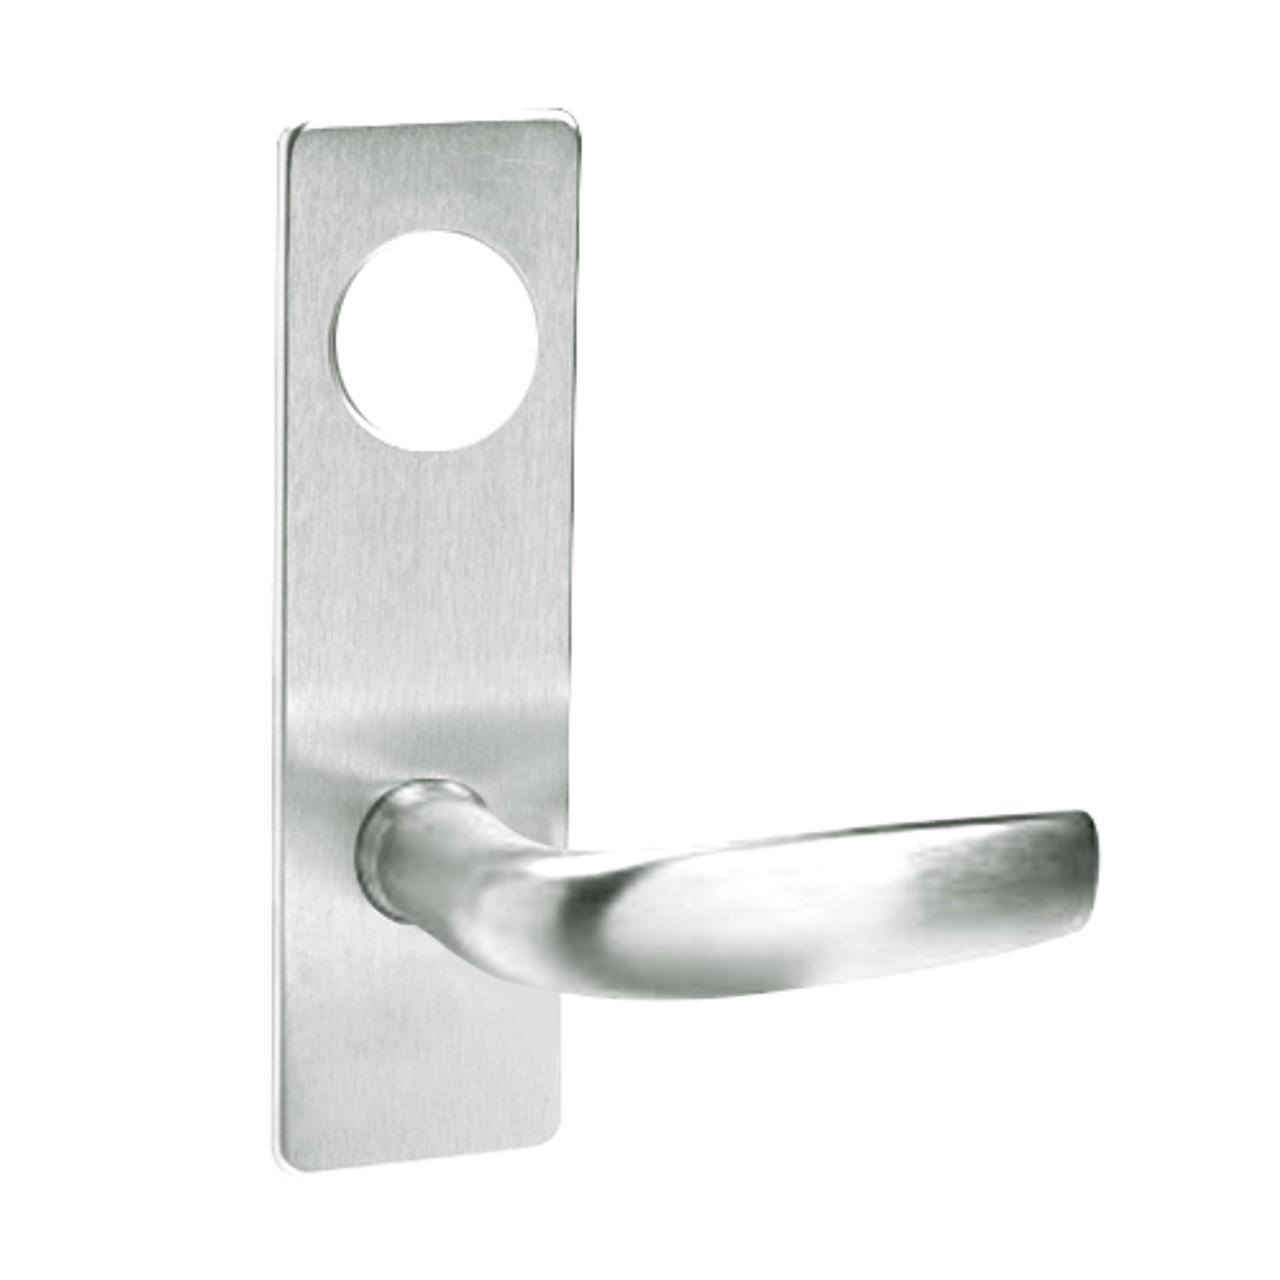 ML2032-CSN-618-LC Corbin Russwin ML2000 Series Mortise Institution Locksets with Citation Lever in Bright Nickel